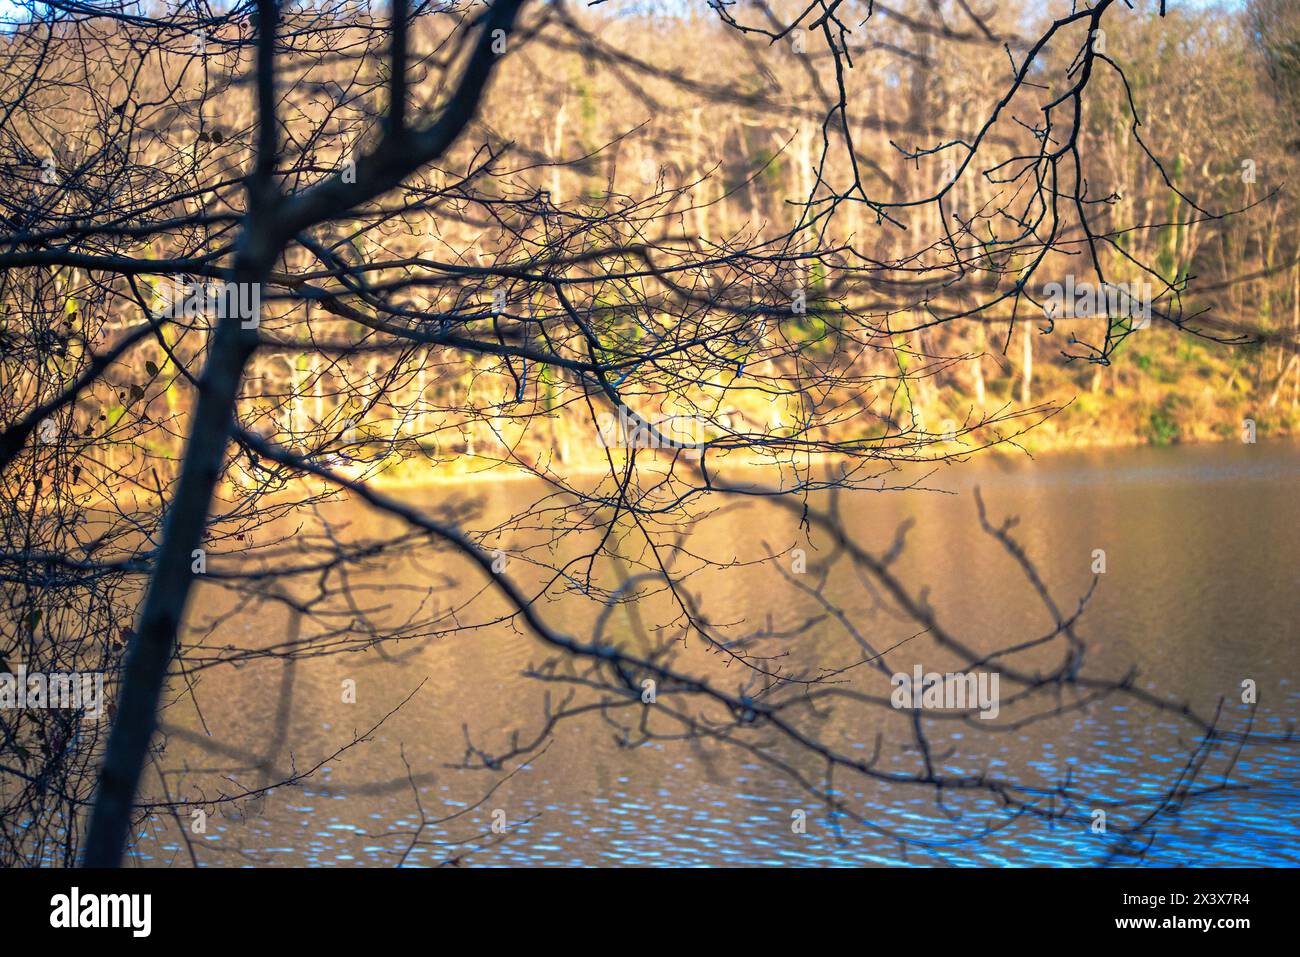 Tree branches frame a serene lake view, creating a tranquil and picturesque scene of nature's beauty. Stock Photo